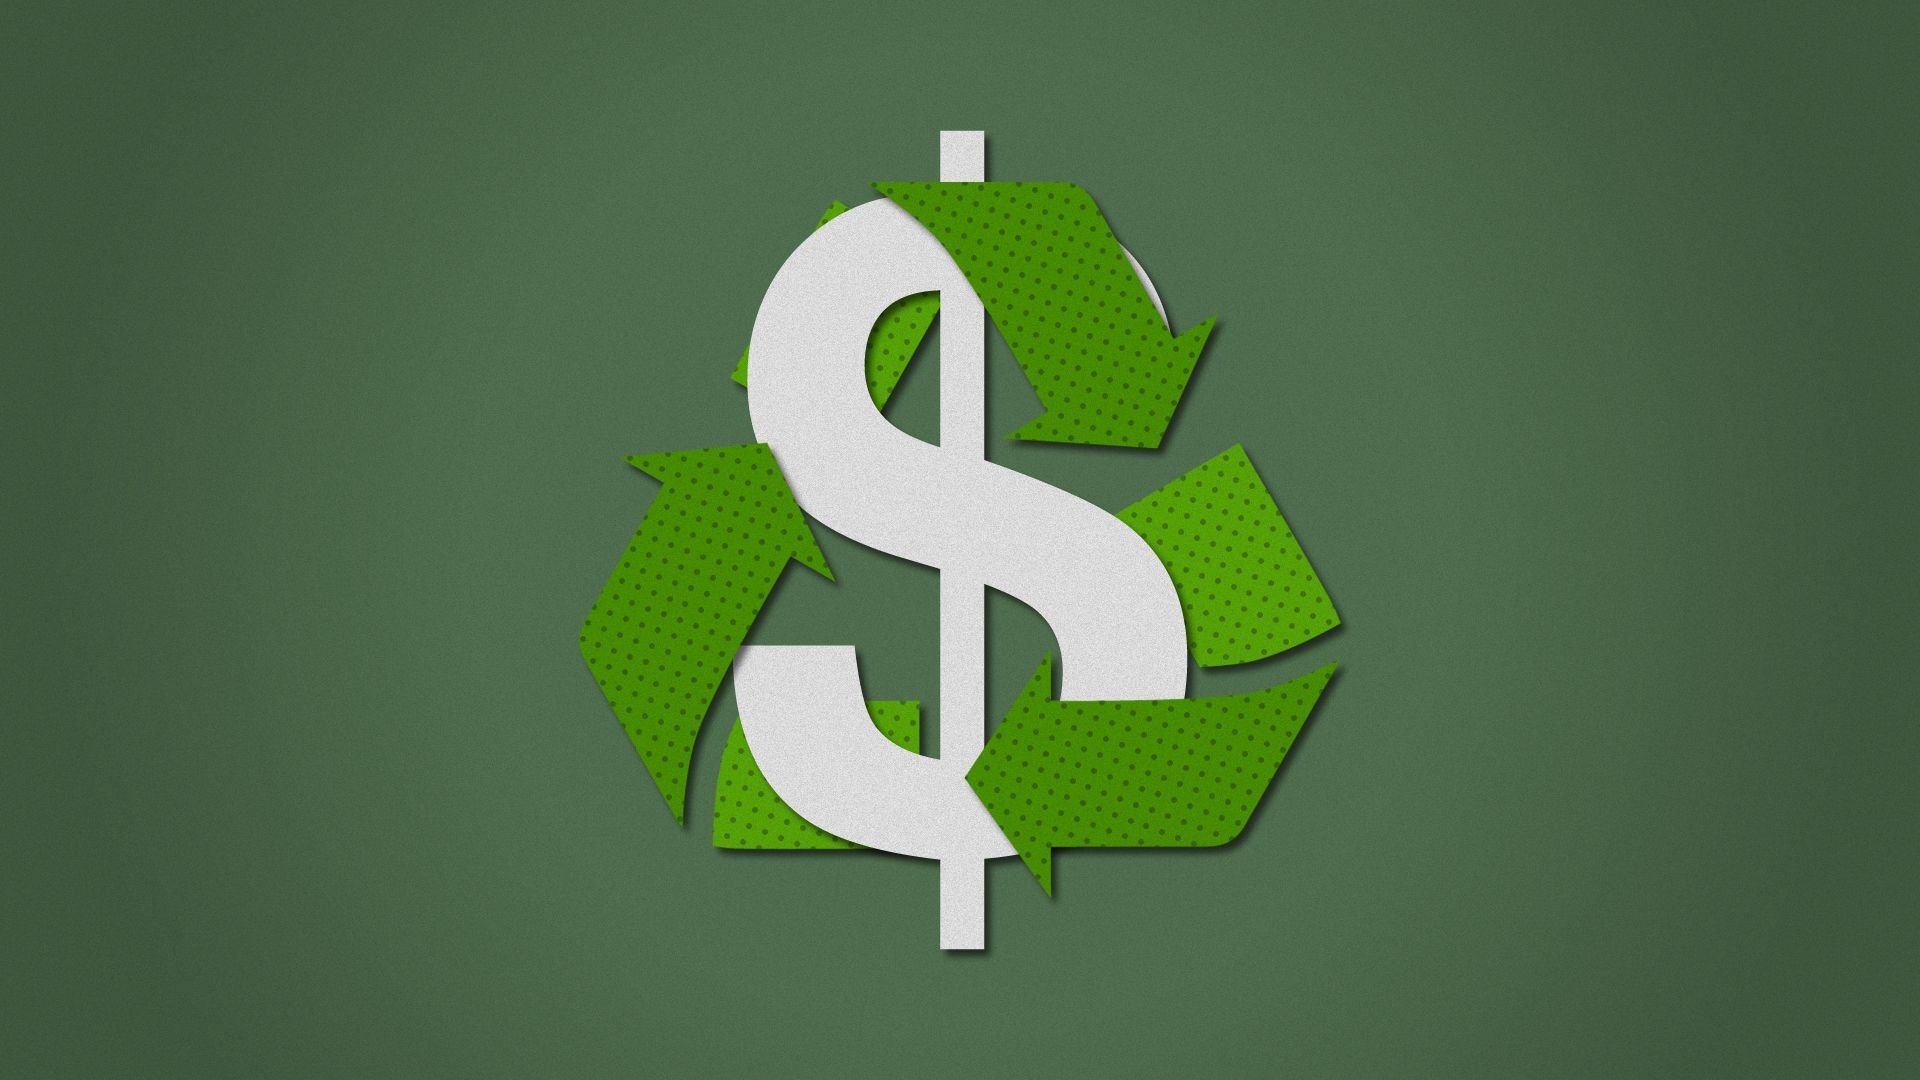 Illustration of a dollar sign within a recycling symbol.